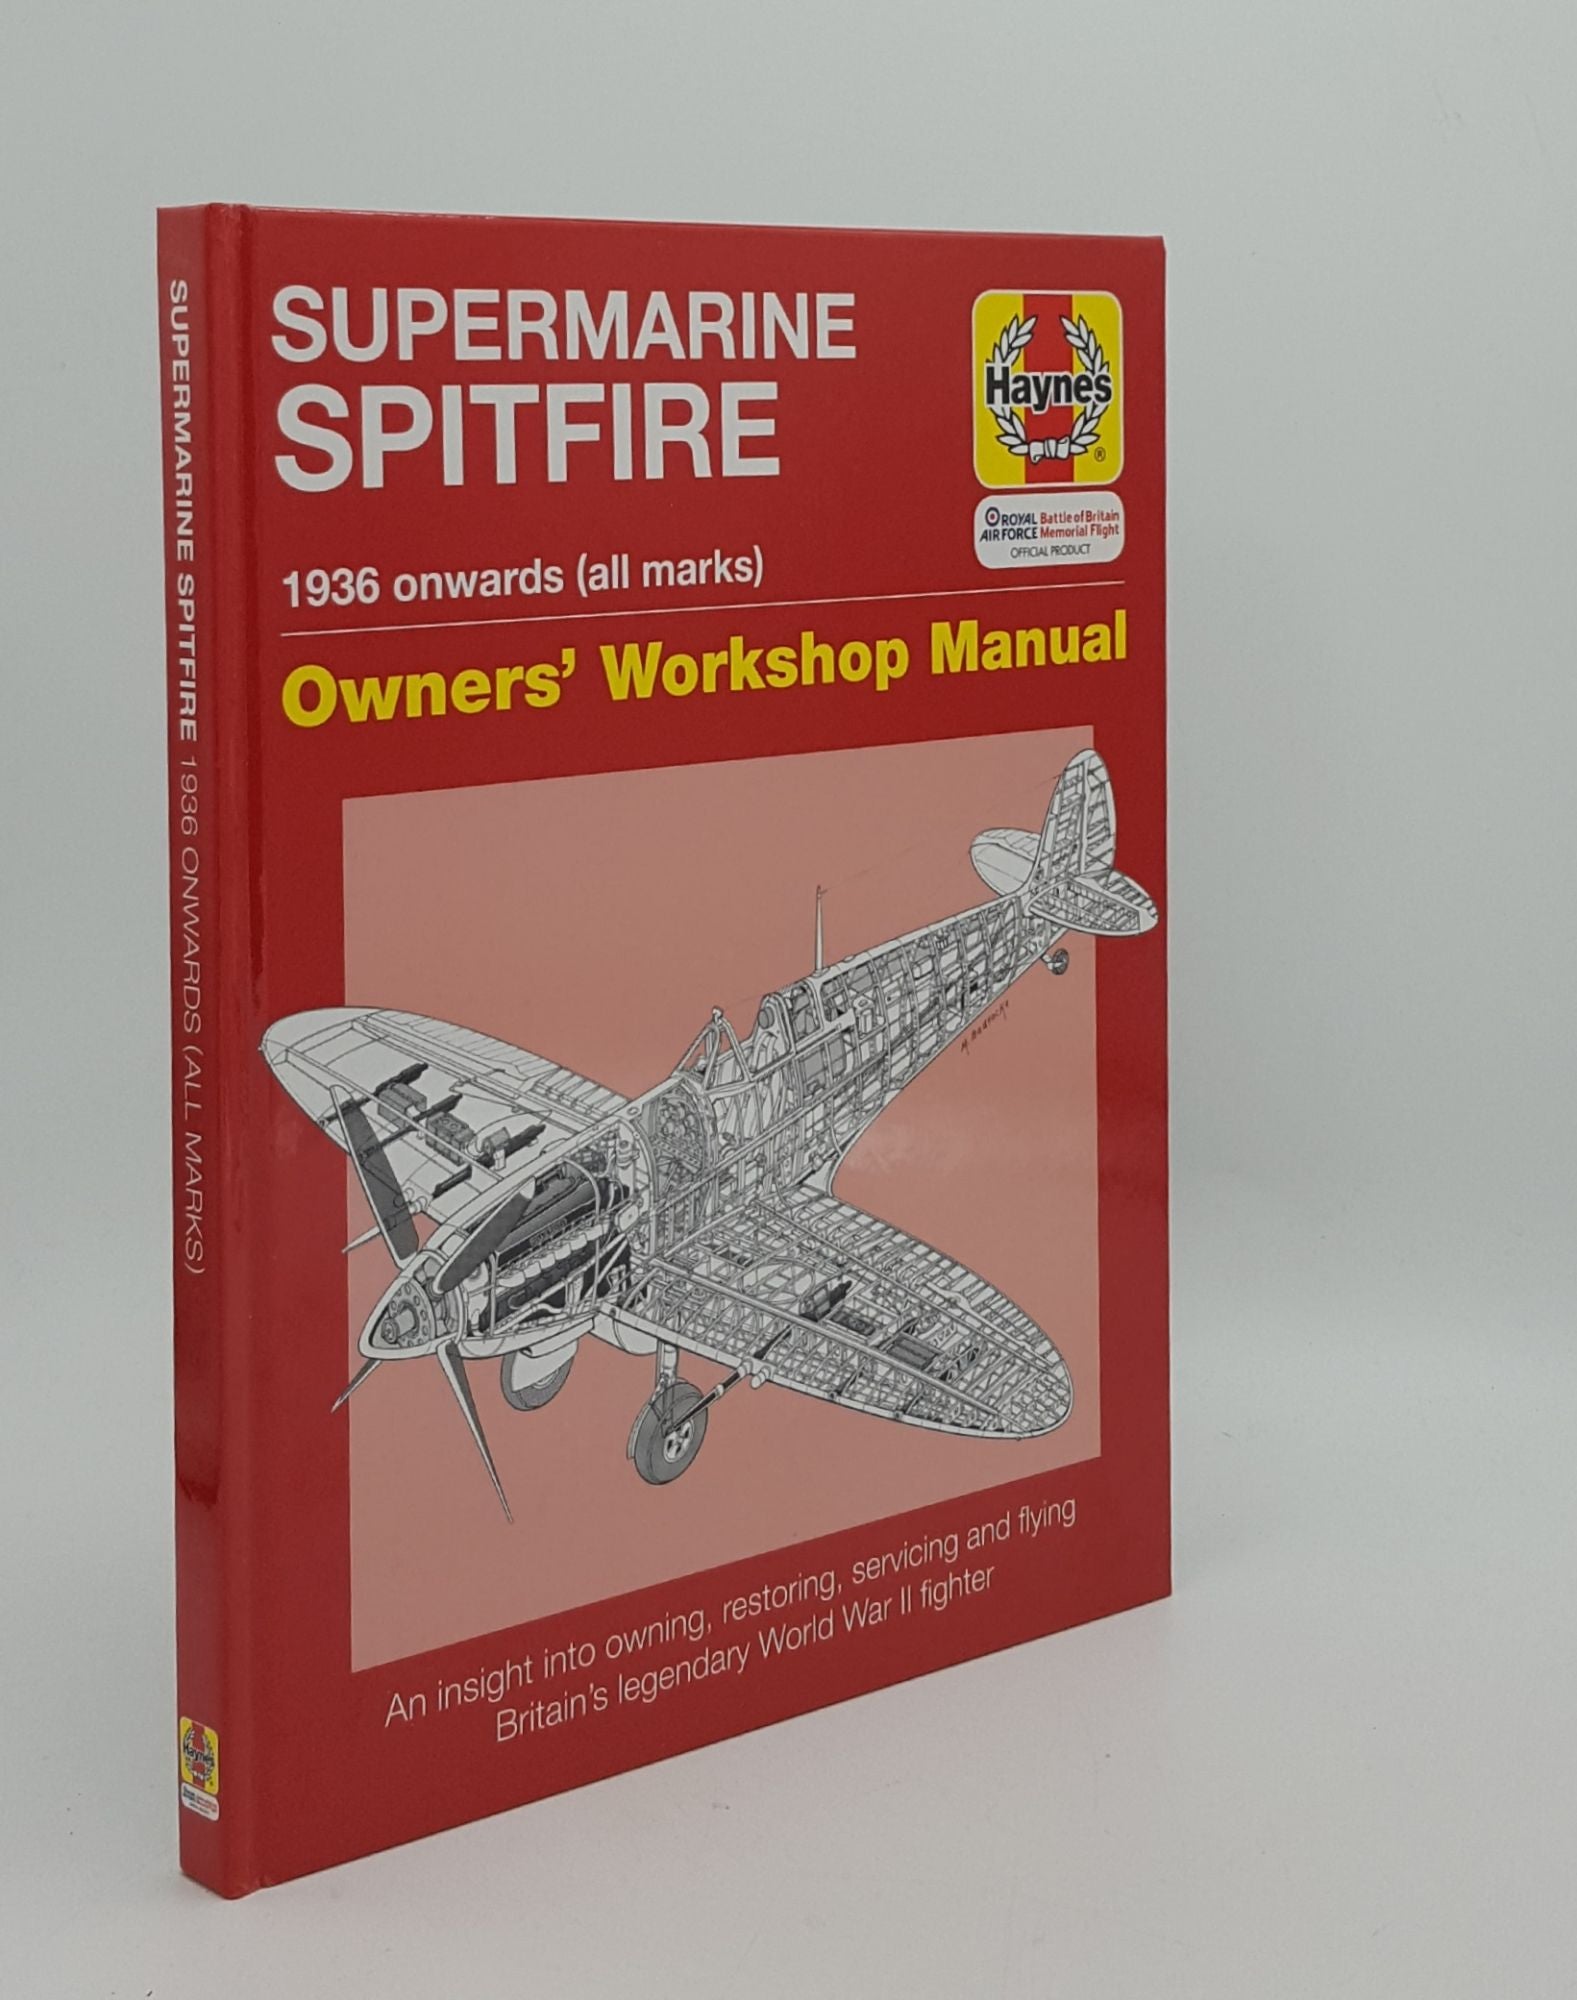 PRICE Alfred, BLACKAH Paul - Supermarine Spitfire 1936 Onwards (All Marks) Owners' Workshop Manual an Insight Into Owning, Restoring, Servicing and Flying Britain's Classic World War II Fighter